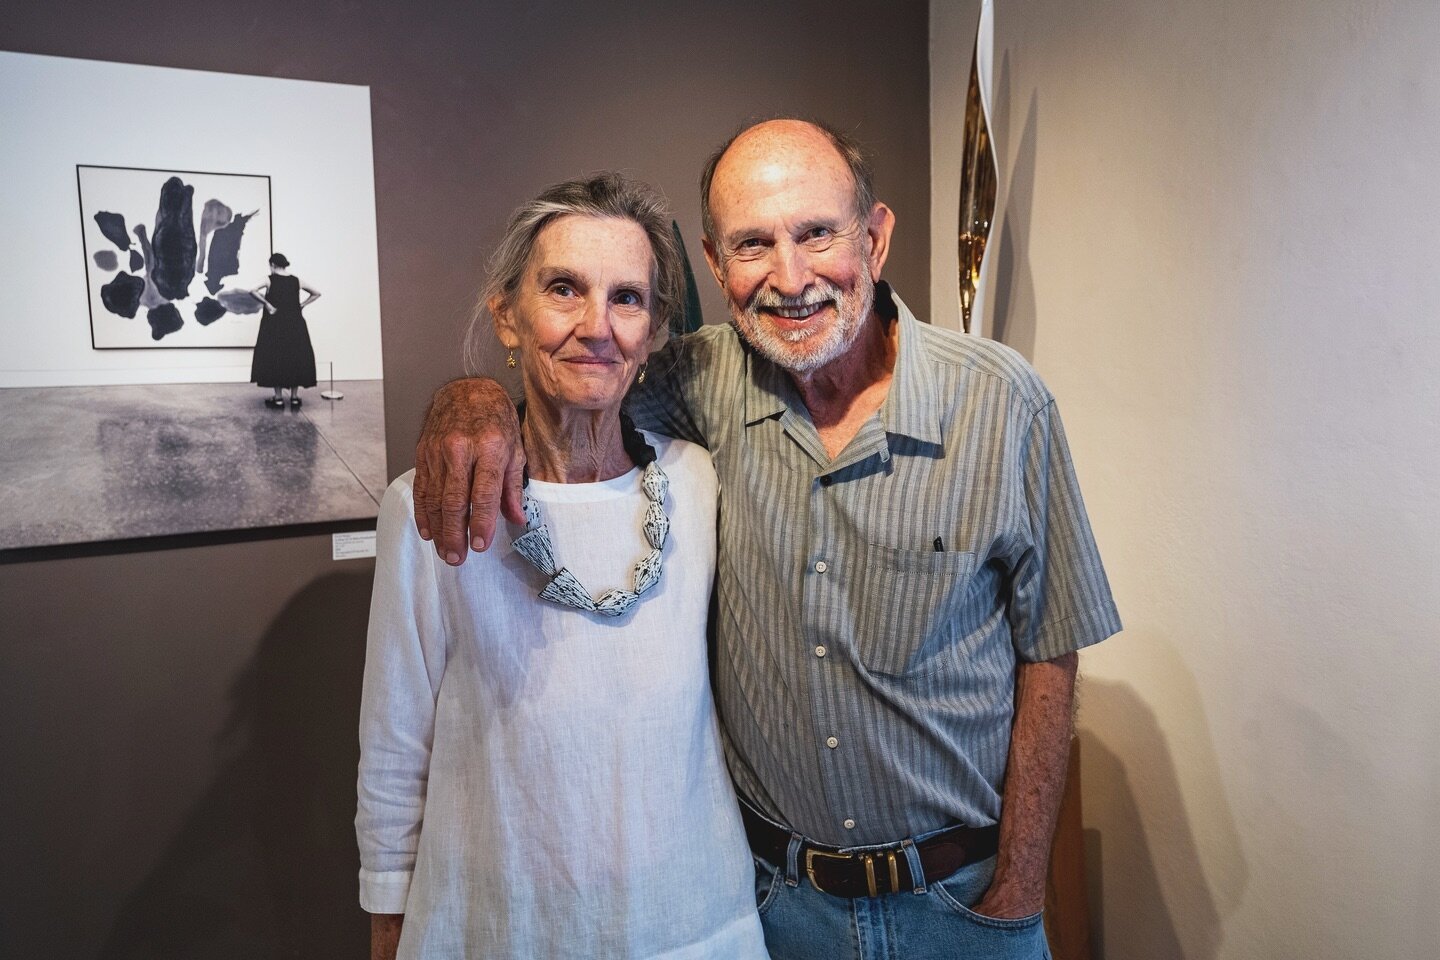 Have a great weekend and stop by the gallery while your doing it to see what&rsquo;s new and say hi. Helen &amp; Ben. 📷by Rob O&rsquo;Neal